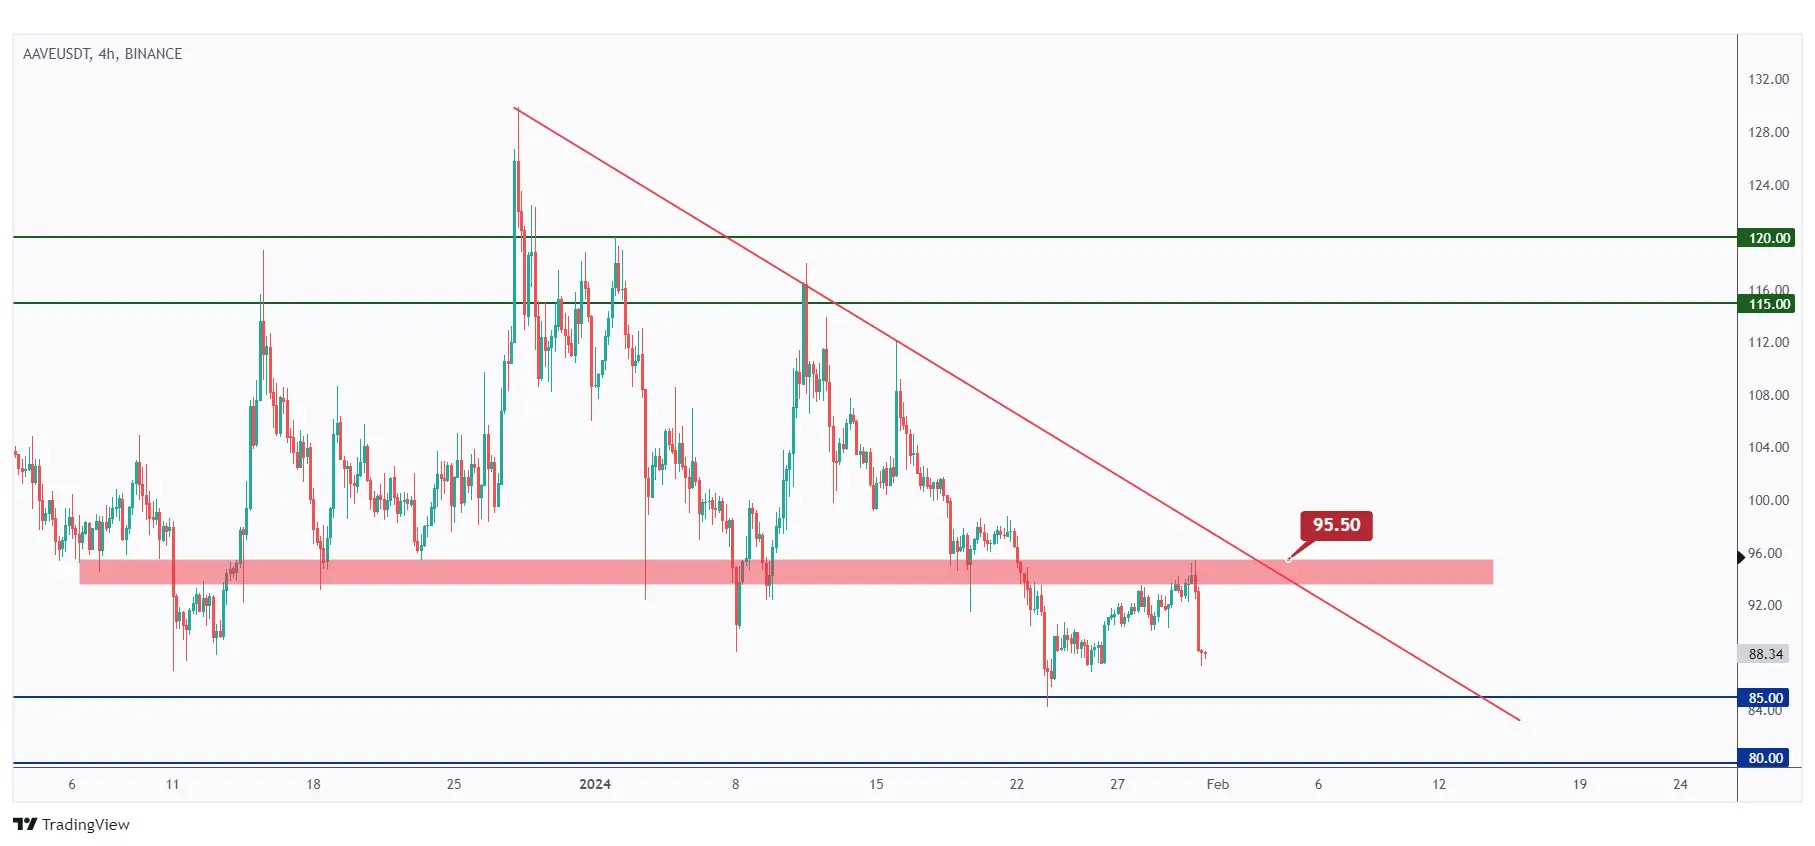 aave 4h chart showing the last major high at $95.5 that we need a break above for the bulls to take over and start the next impulse movement upward.